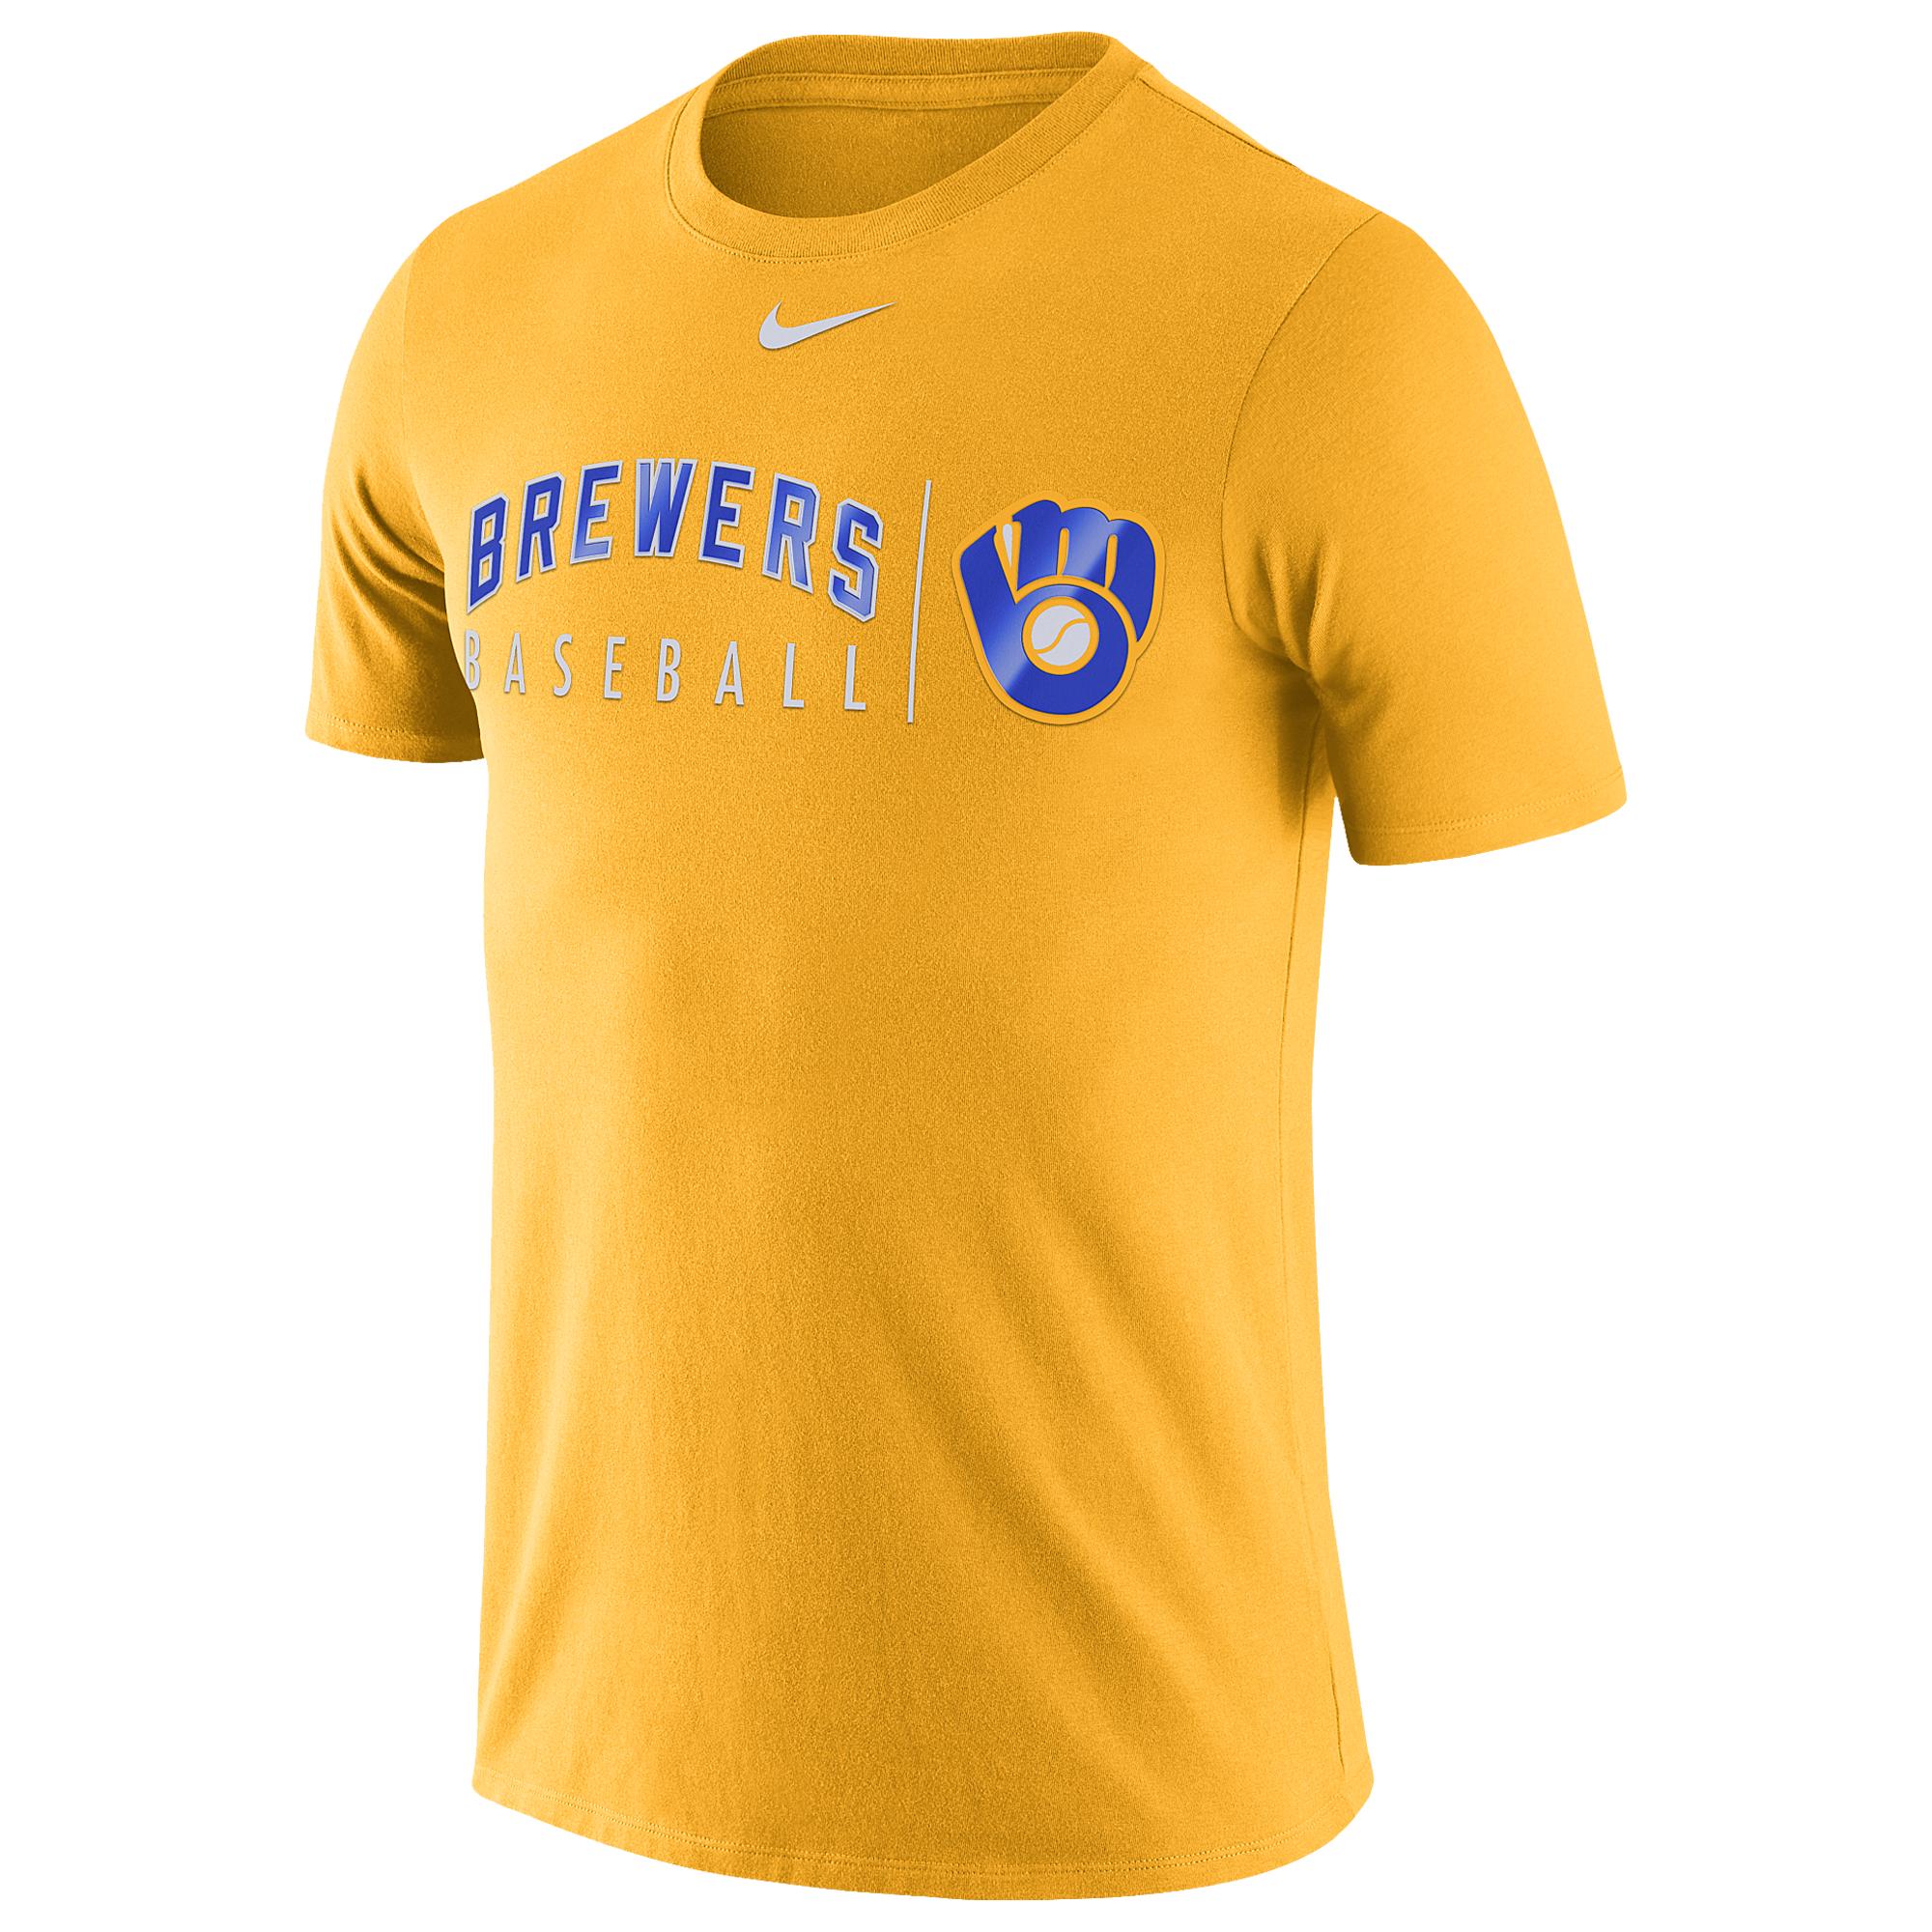 Nike Milwaukee Brewers Mlb Dri-fit Cotton Practice T-shirt in Yellow ...